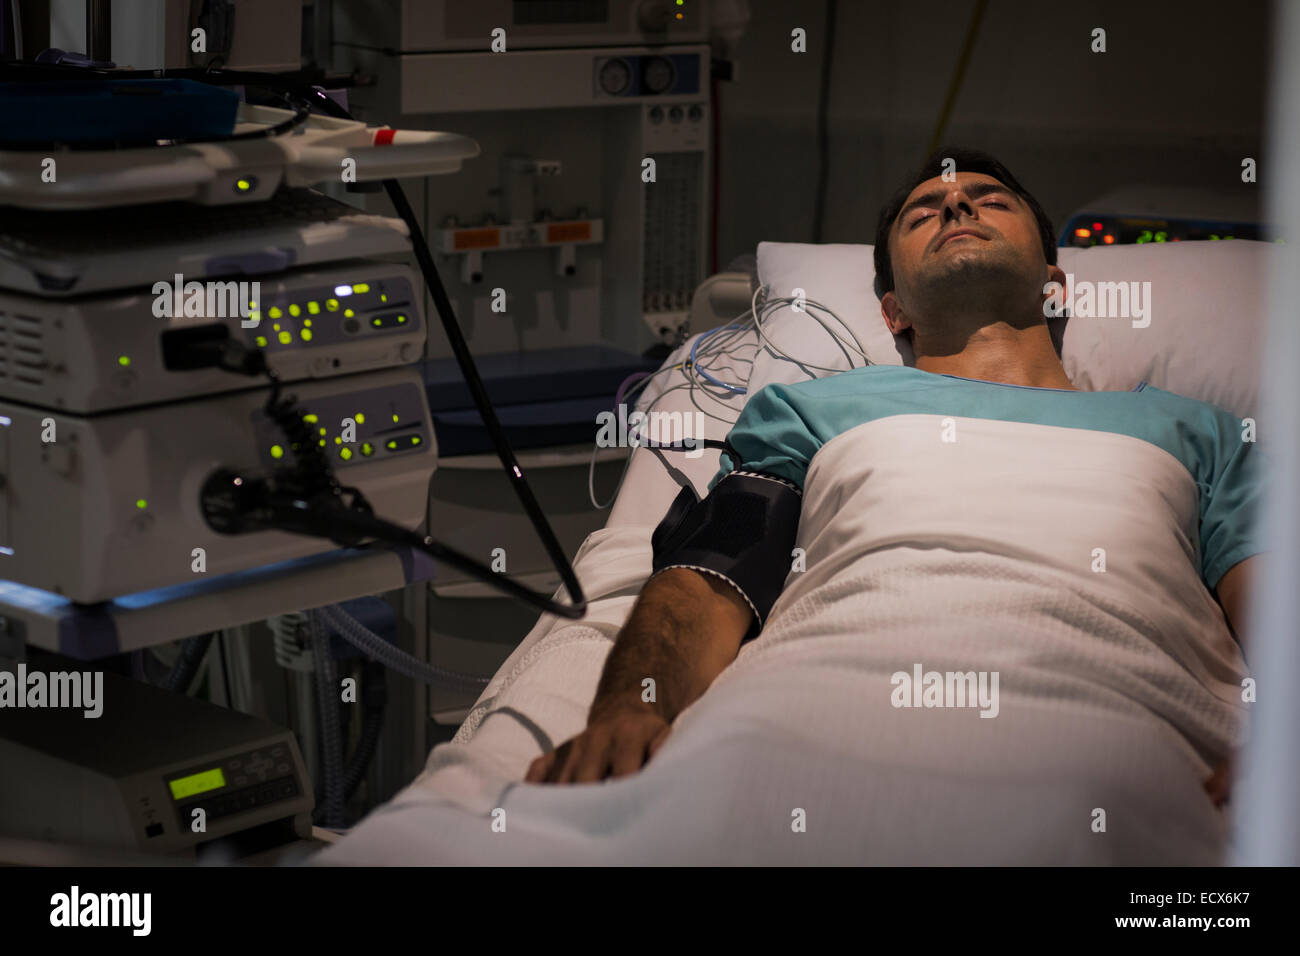 Patient lying in bed, attached to monitoring equipment in intensive care unit Stock Photo